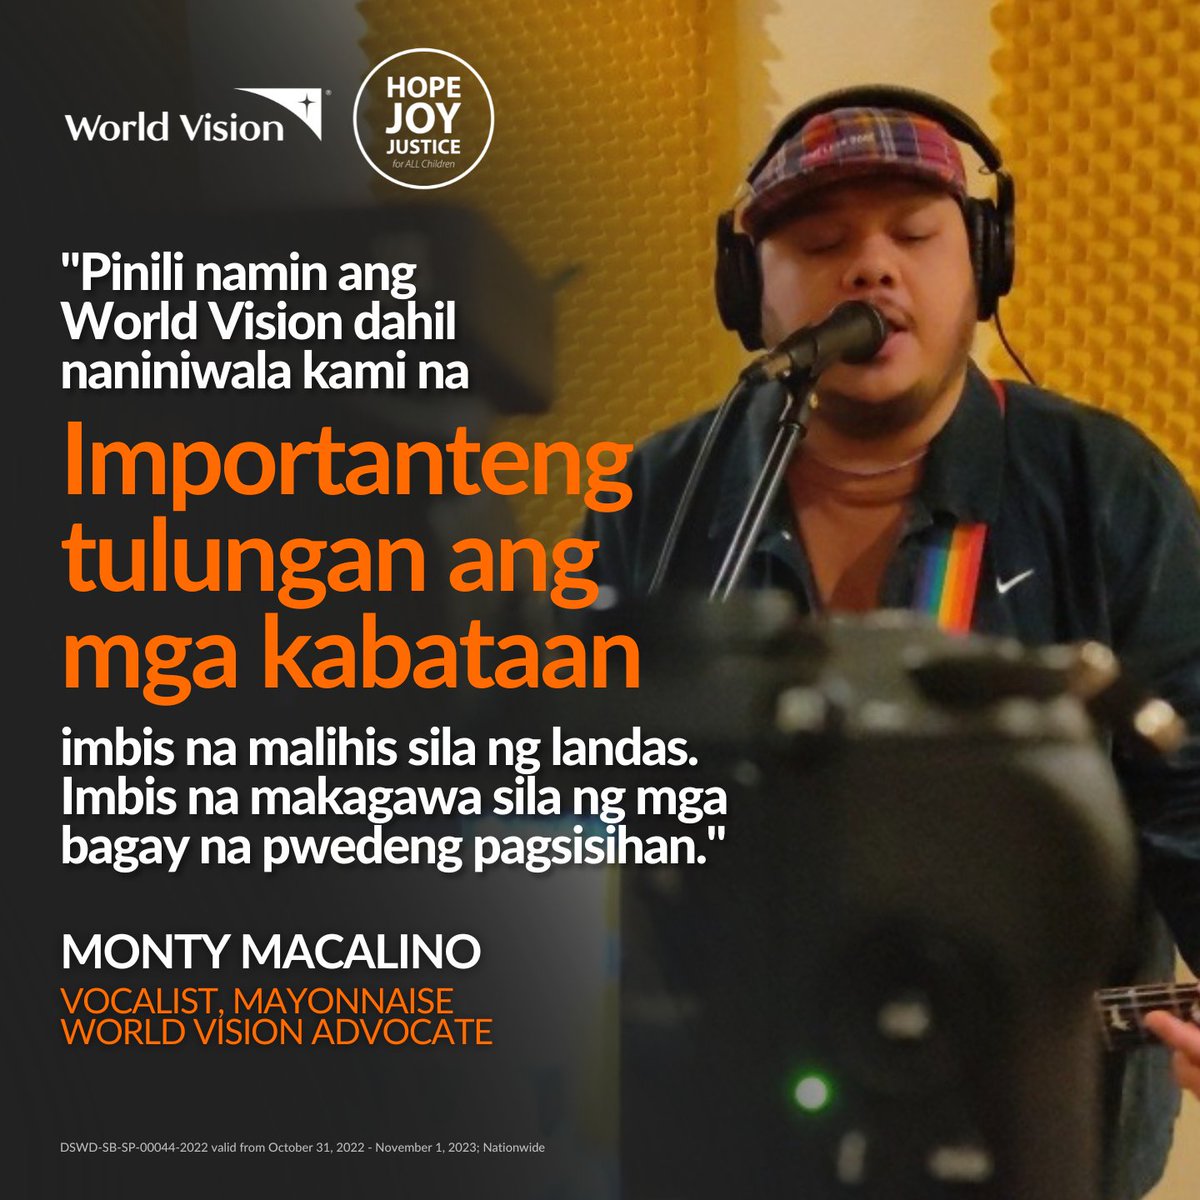 Did you grow up listening to @MontyMacalino? We did, too! 🤩

The @mayonnaisemusic frontman wants vulnerable Filipino children to stay in the right path as they reach new heights in the future! 

BE THE #REASON NOW: wvph.co/3MxMnoU

#WorldVisionPH #65YearsofHopeJoyJustice